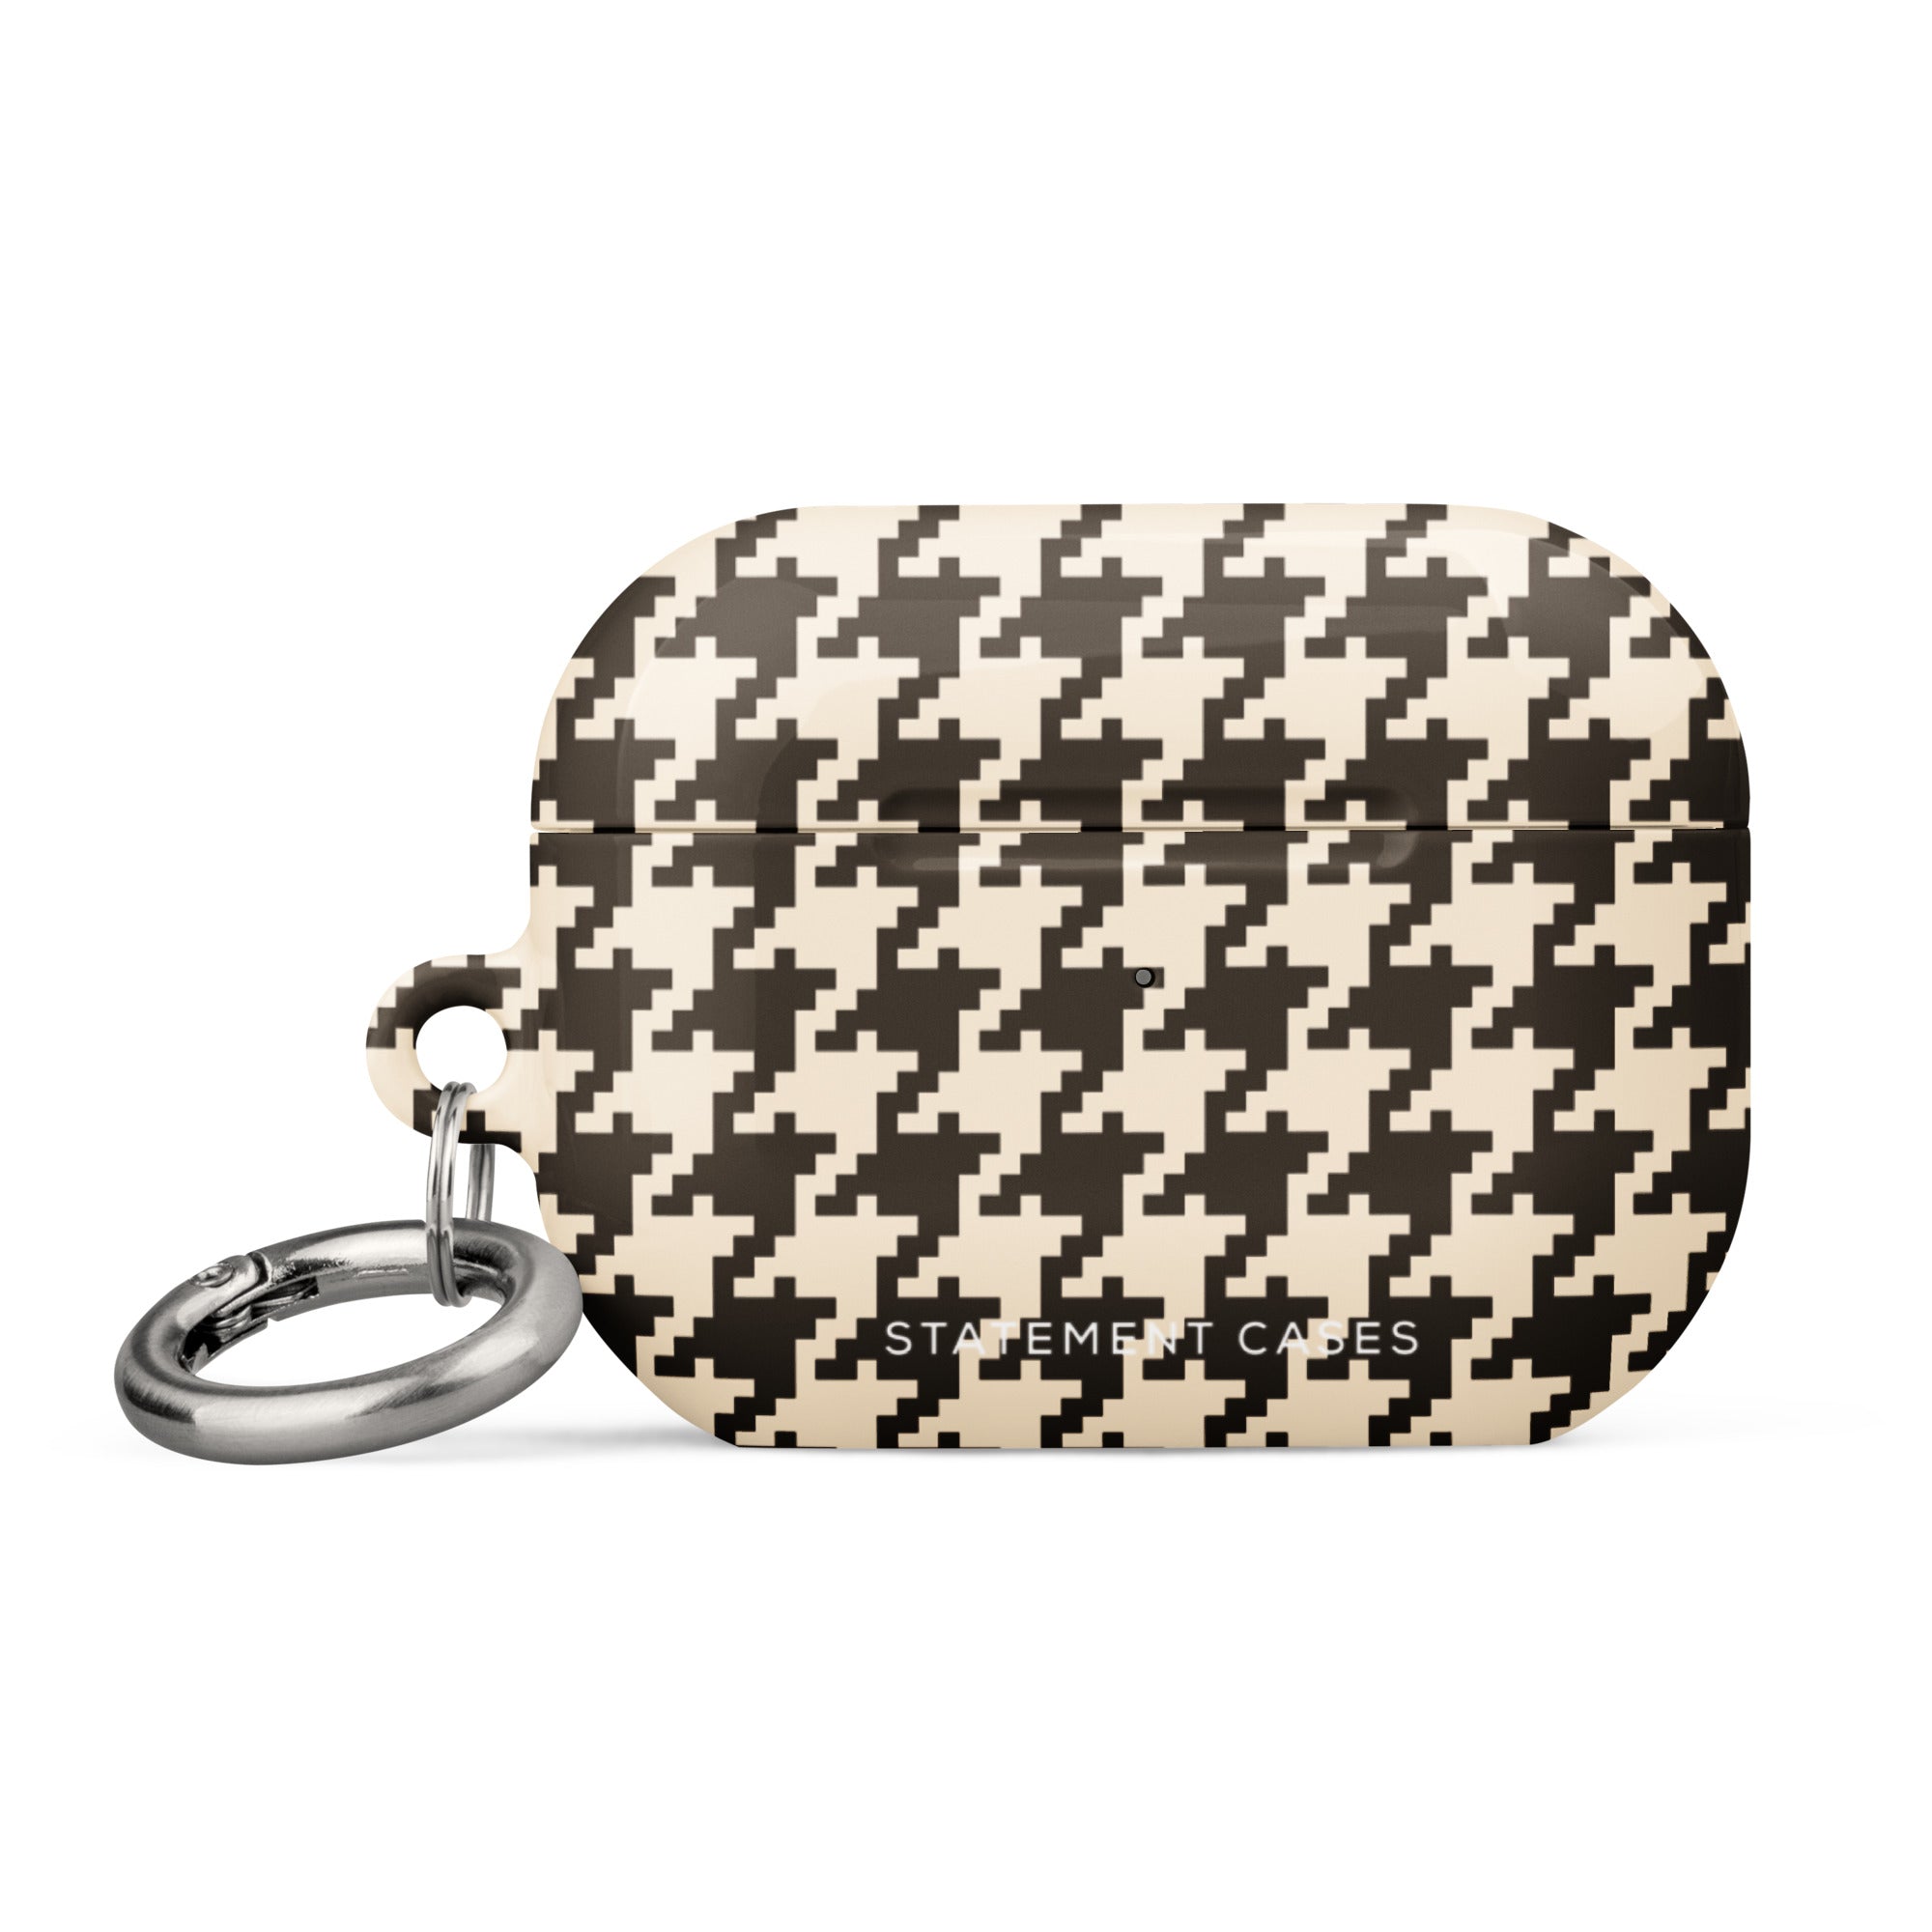 A rectangular Timeless Houndstooth for AirPods Pro Gen 2 with a black and white houndstooth pattern. The case features impact-absorbing material for added protection and has a small metal carabiner attached to the side for easy carrying. The text "Statement Cases" is subtly printed at the bottom center of the case.